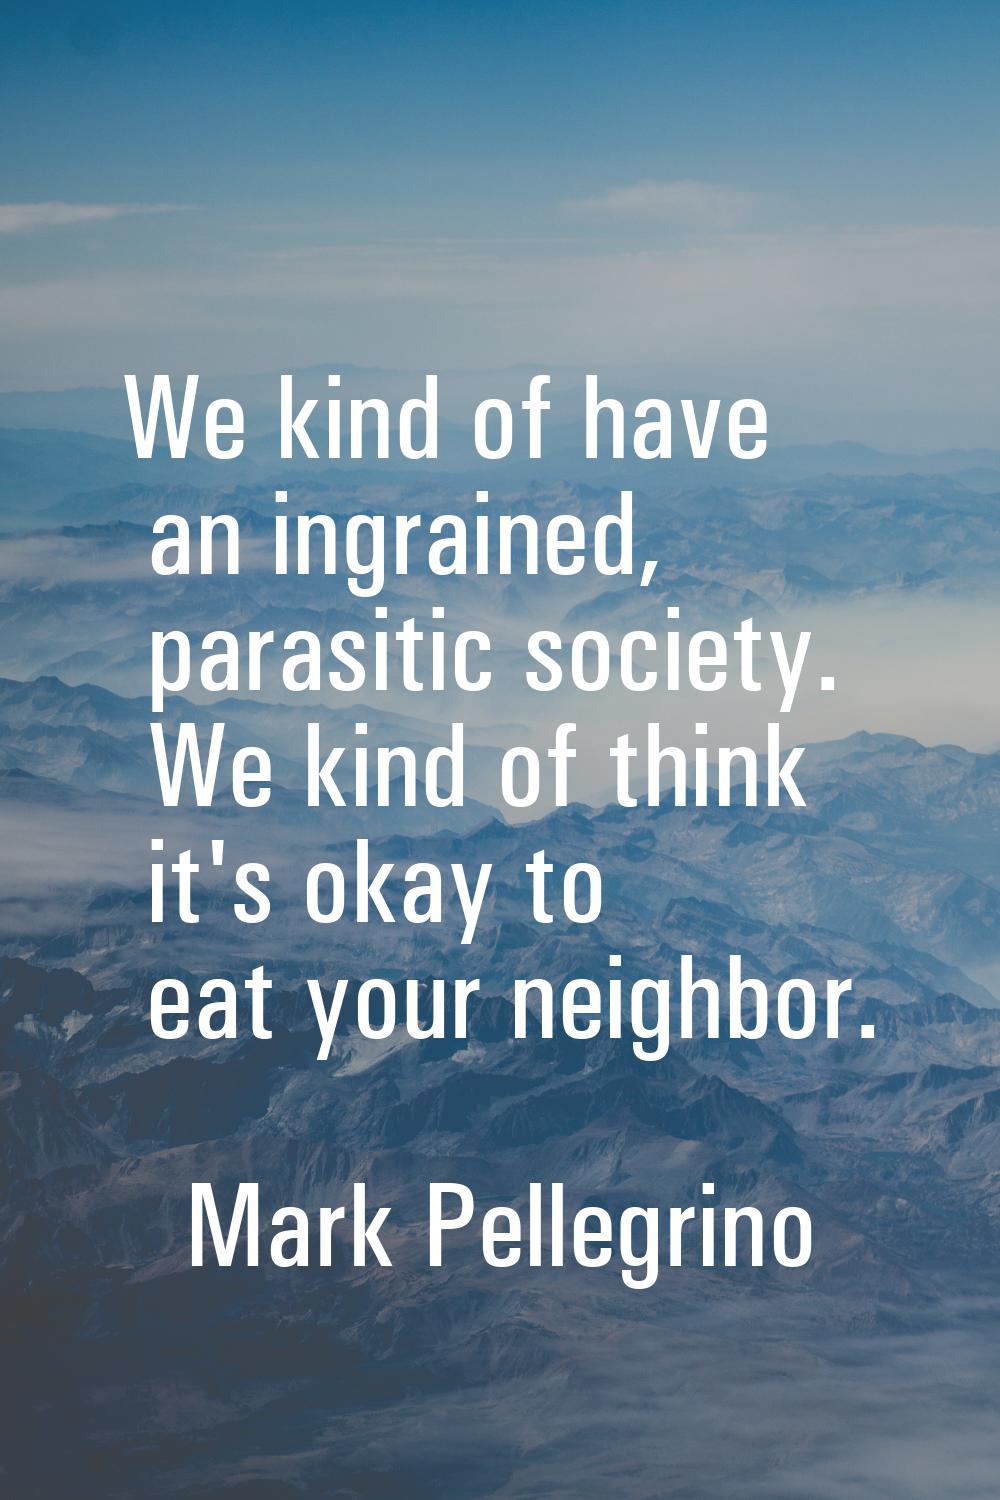 We kind of have an ingrained, parasitic society. We kind of think it's okay to eat your neighbor.